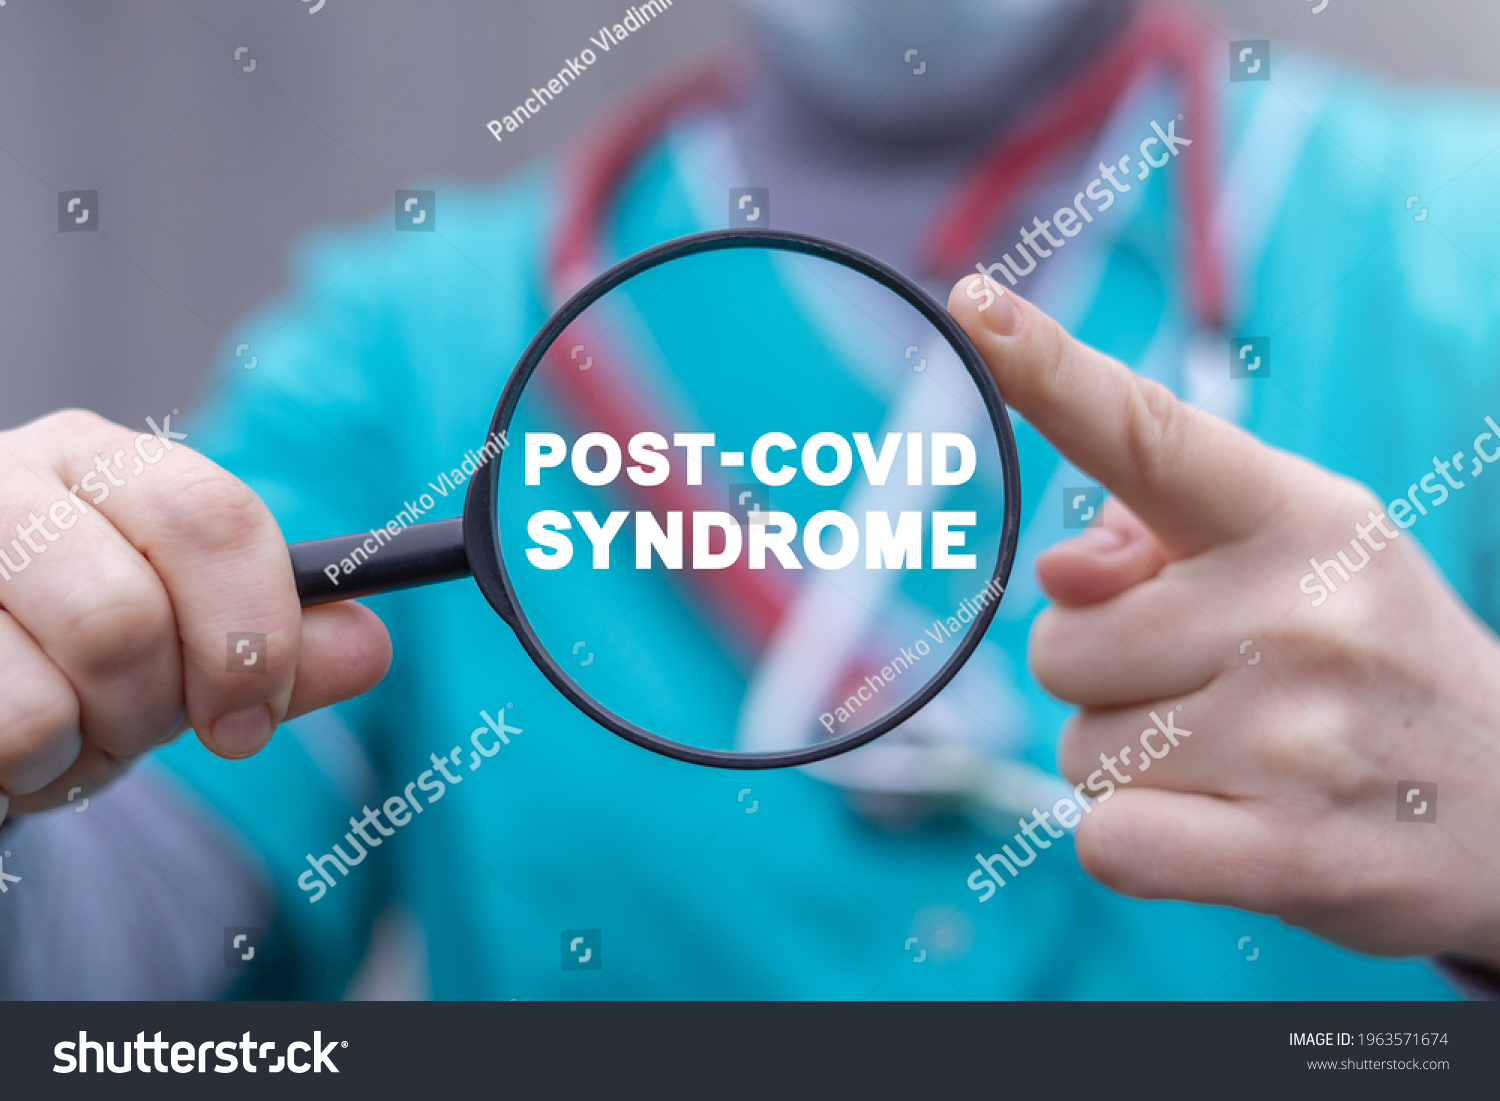 Medical concept of post-covid syndrome. Long COVID. Post COVID-19 stage. #1963571674